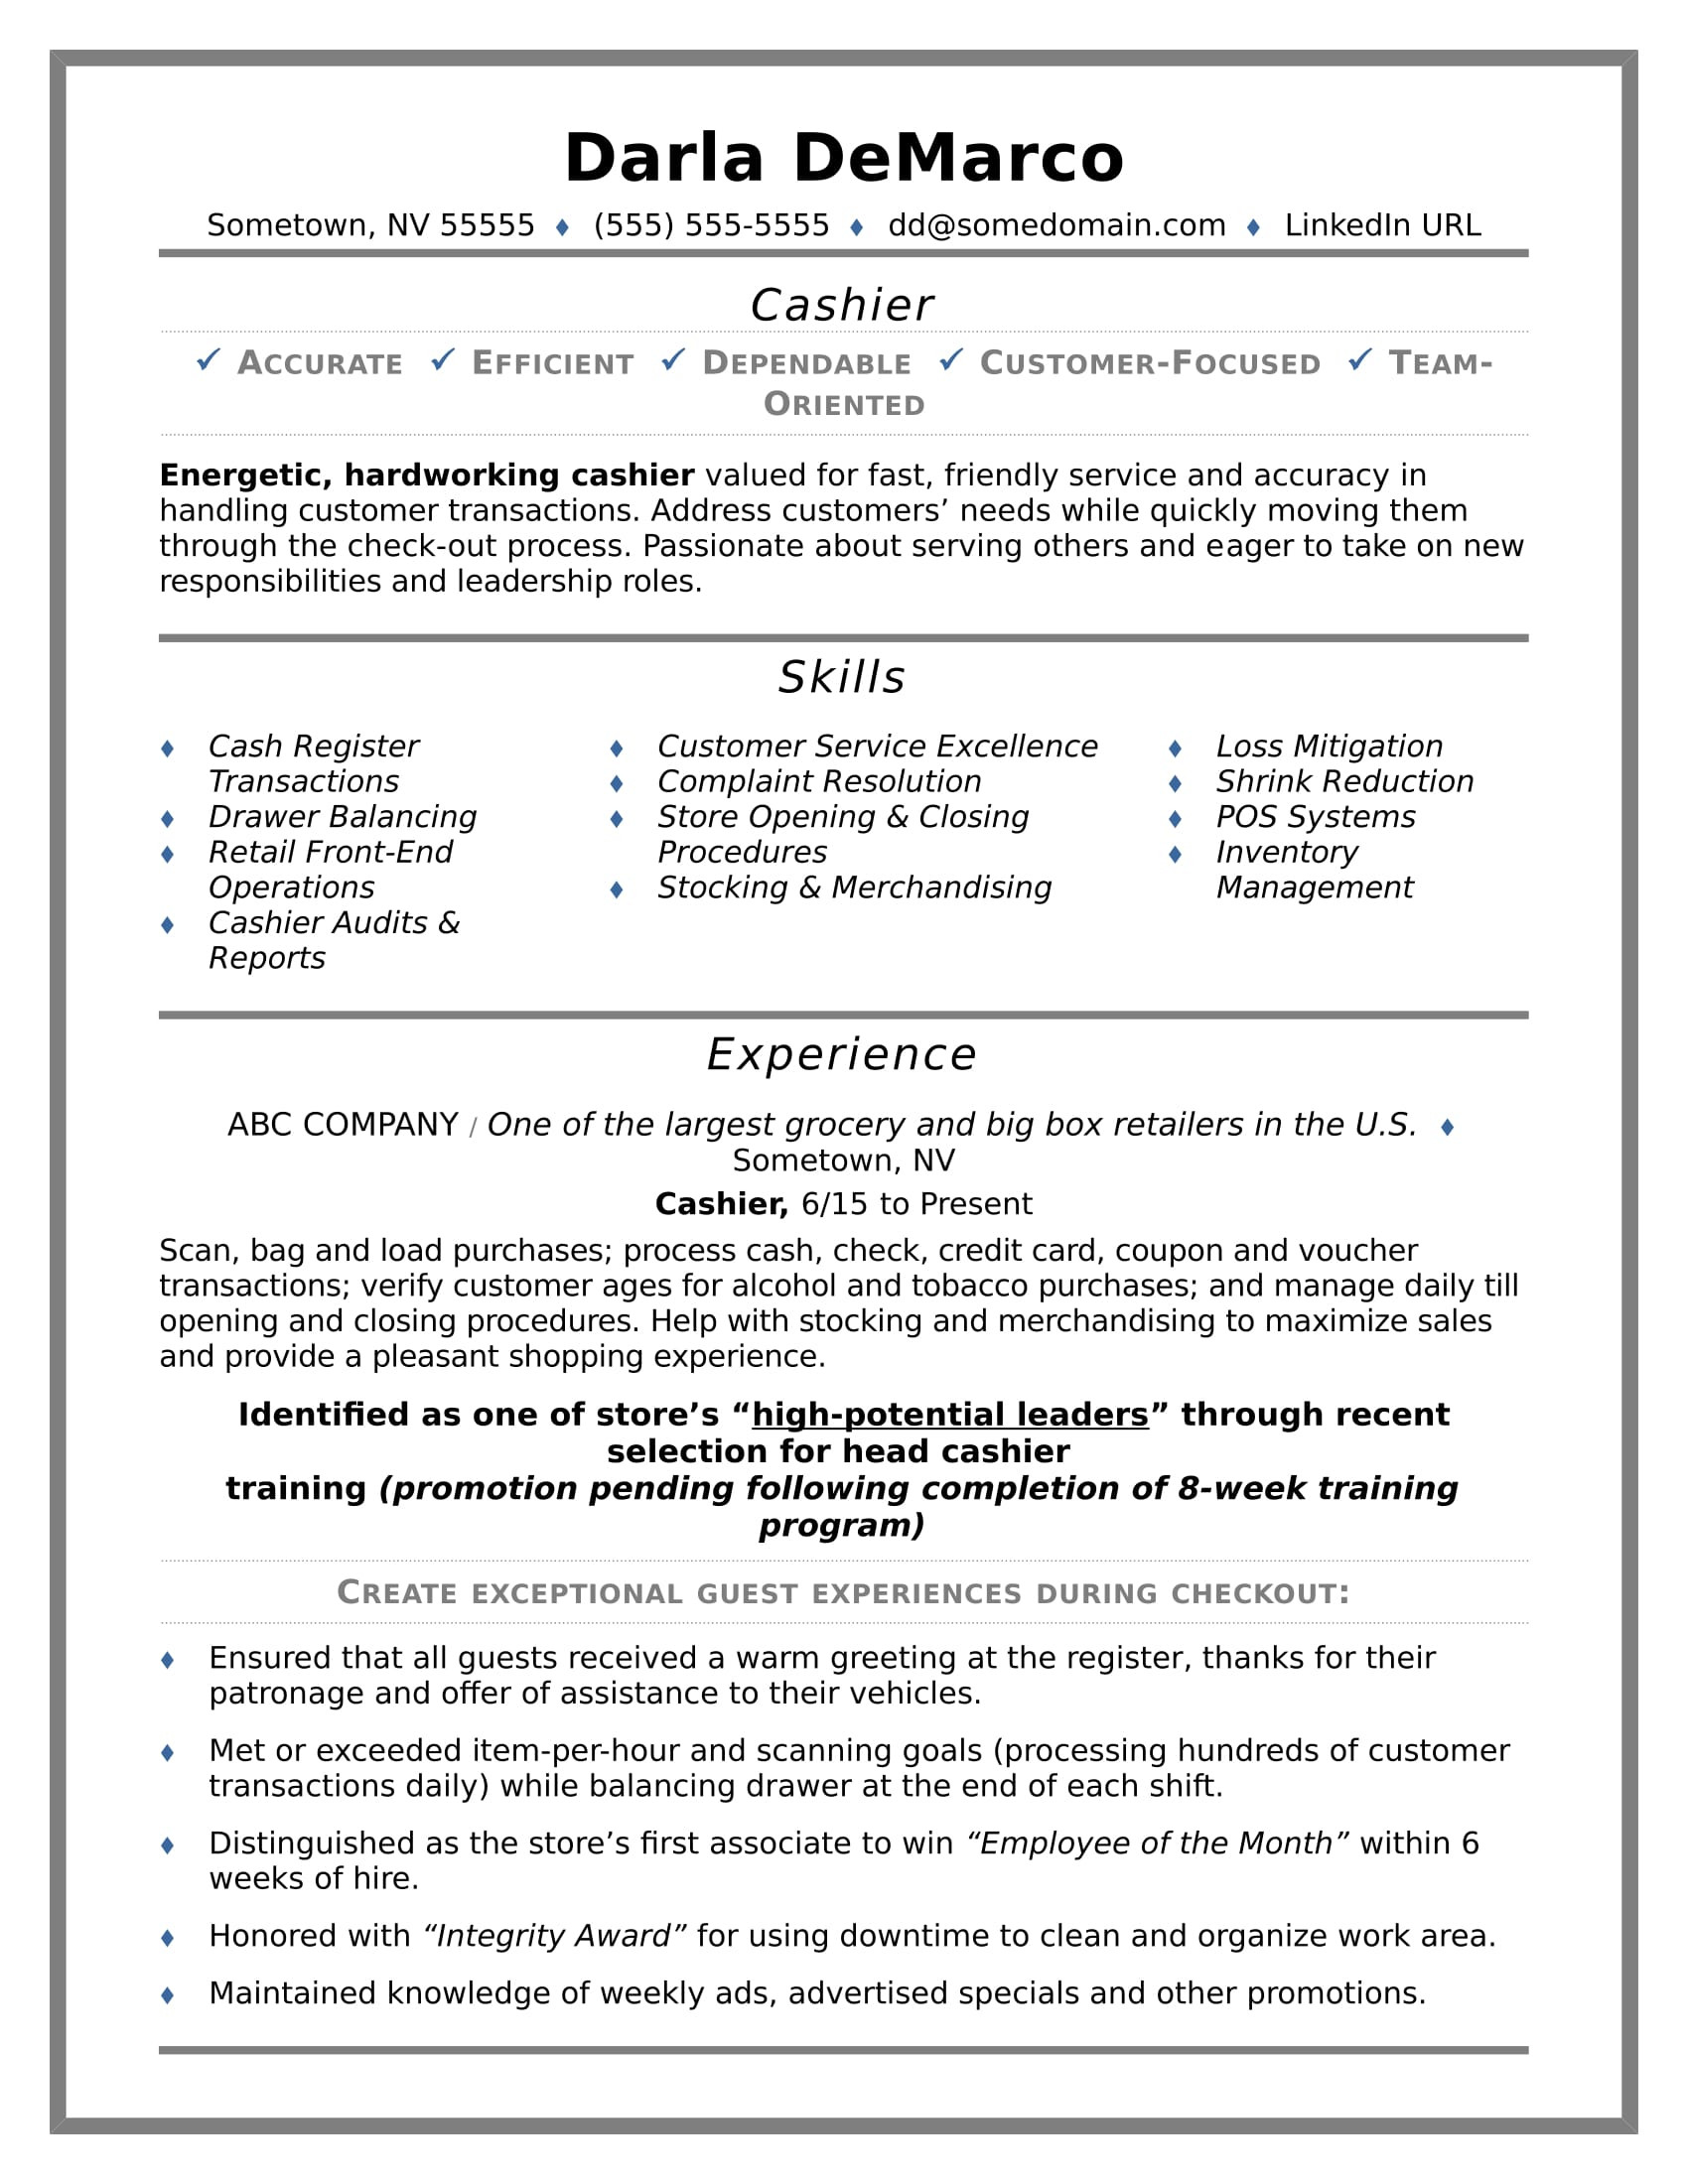 Sample Resume Describing What You are Doing now Cashier Resume Sample Monster.com